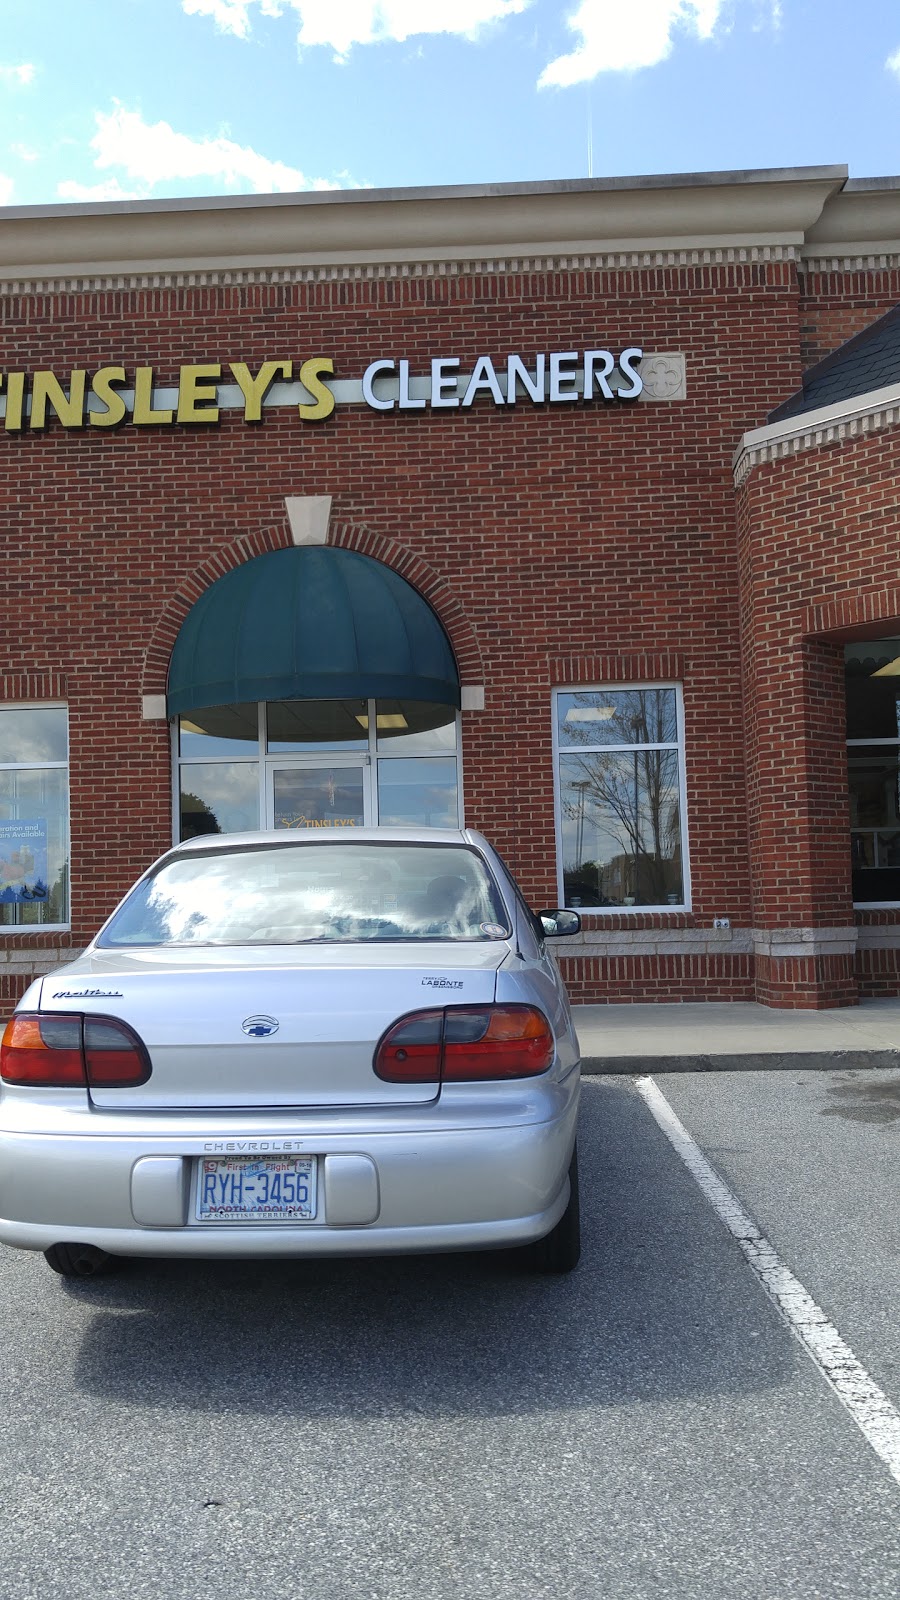 Tinsleys Cleaners | 1573 New Garden Rd # A, Greensboro, NC 27410 | Phone: (336) 632-1299